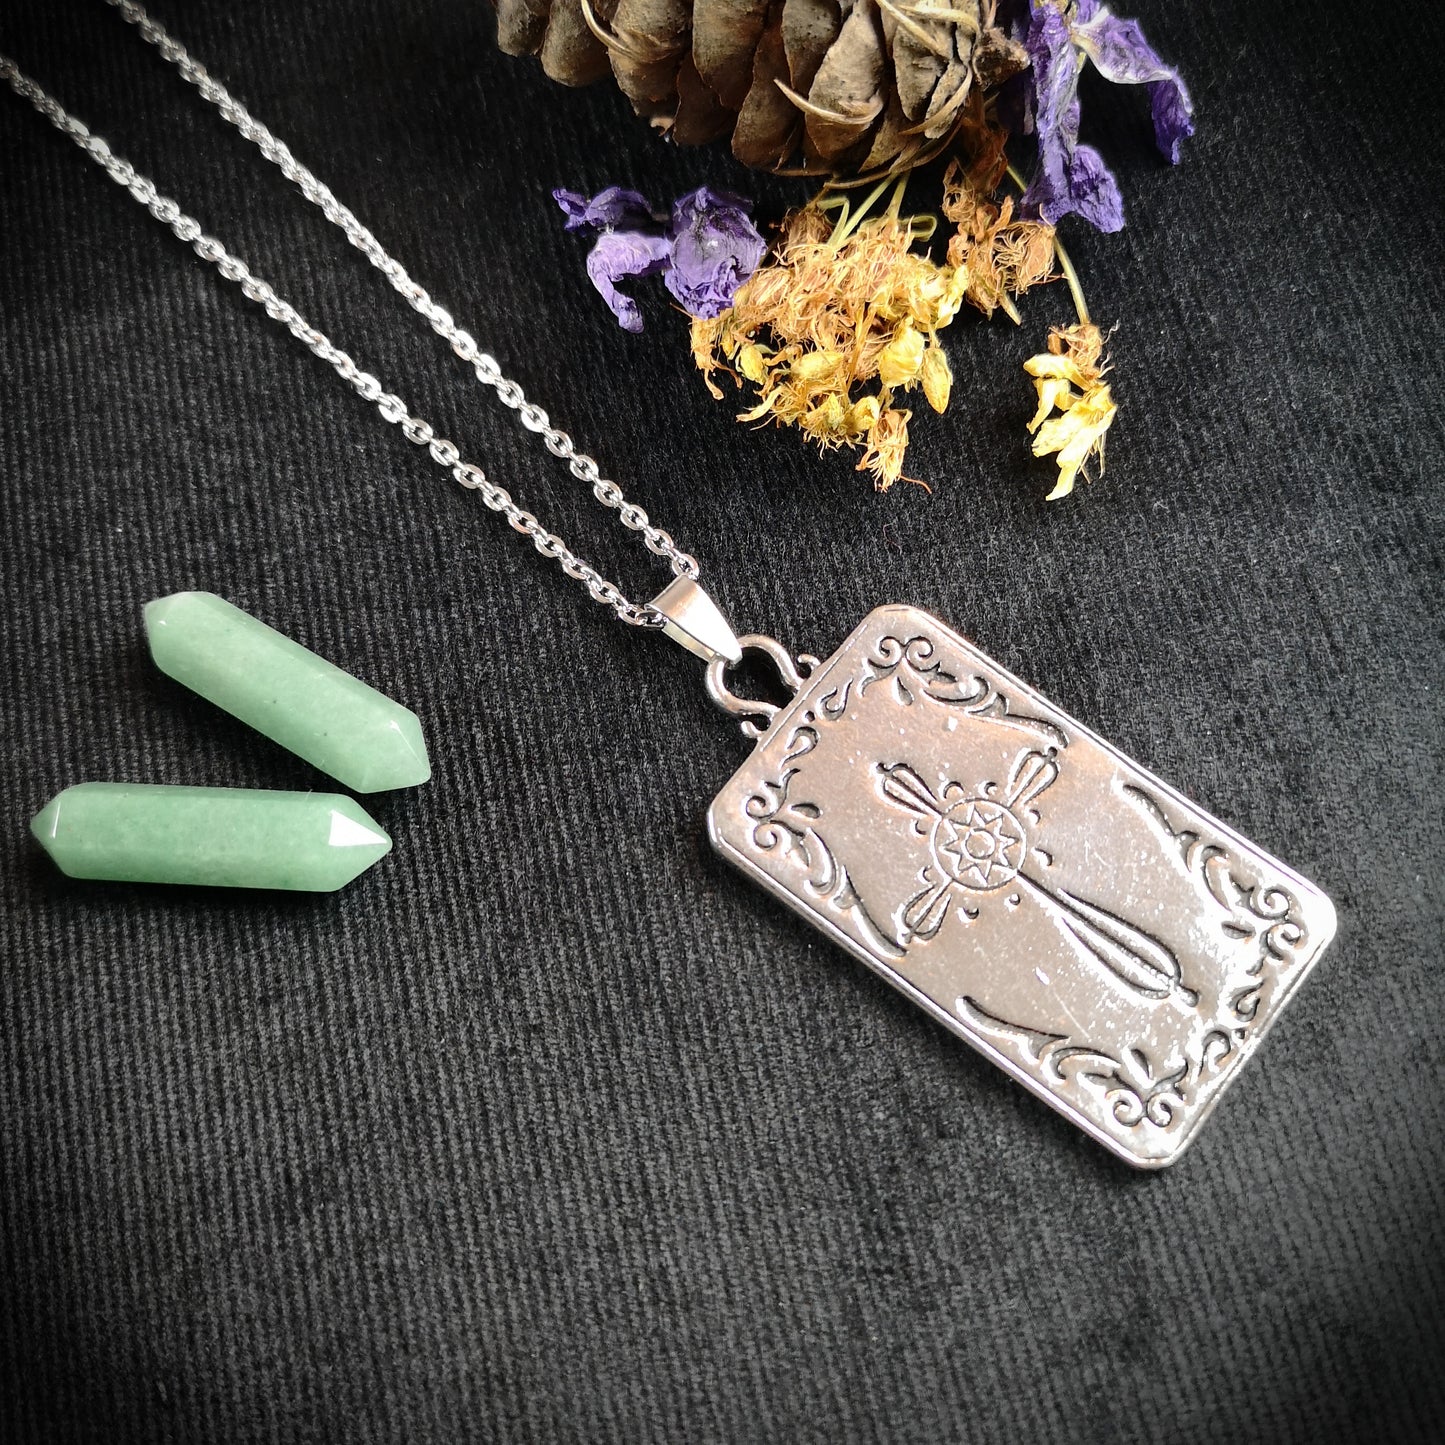 Wheel of fortune tarot arcana necklace with a reversible pendant The French Witch shop